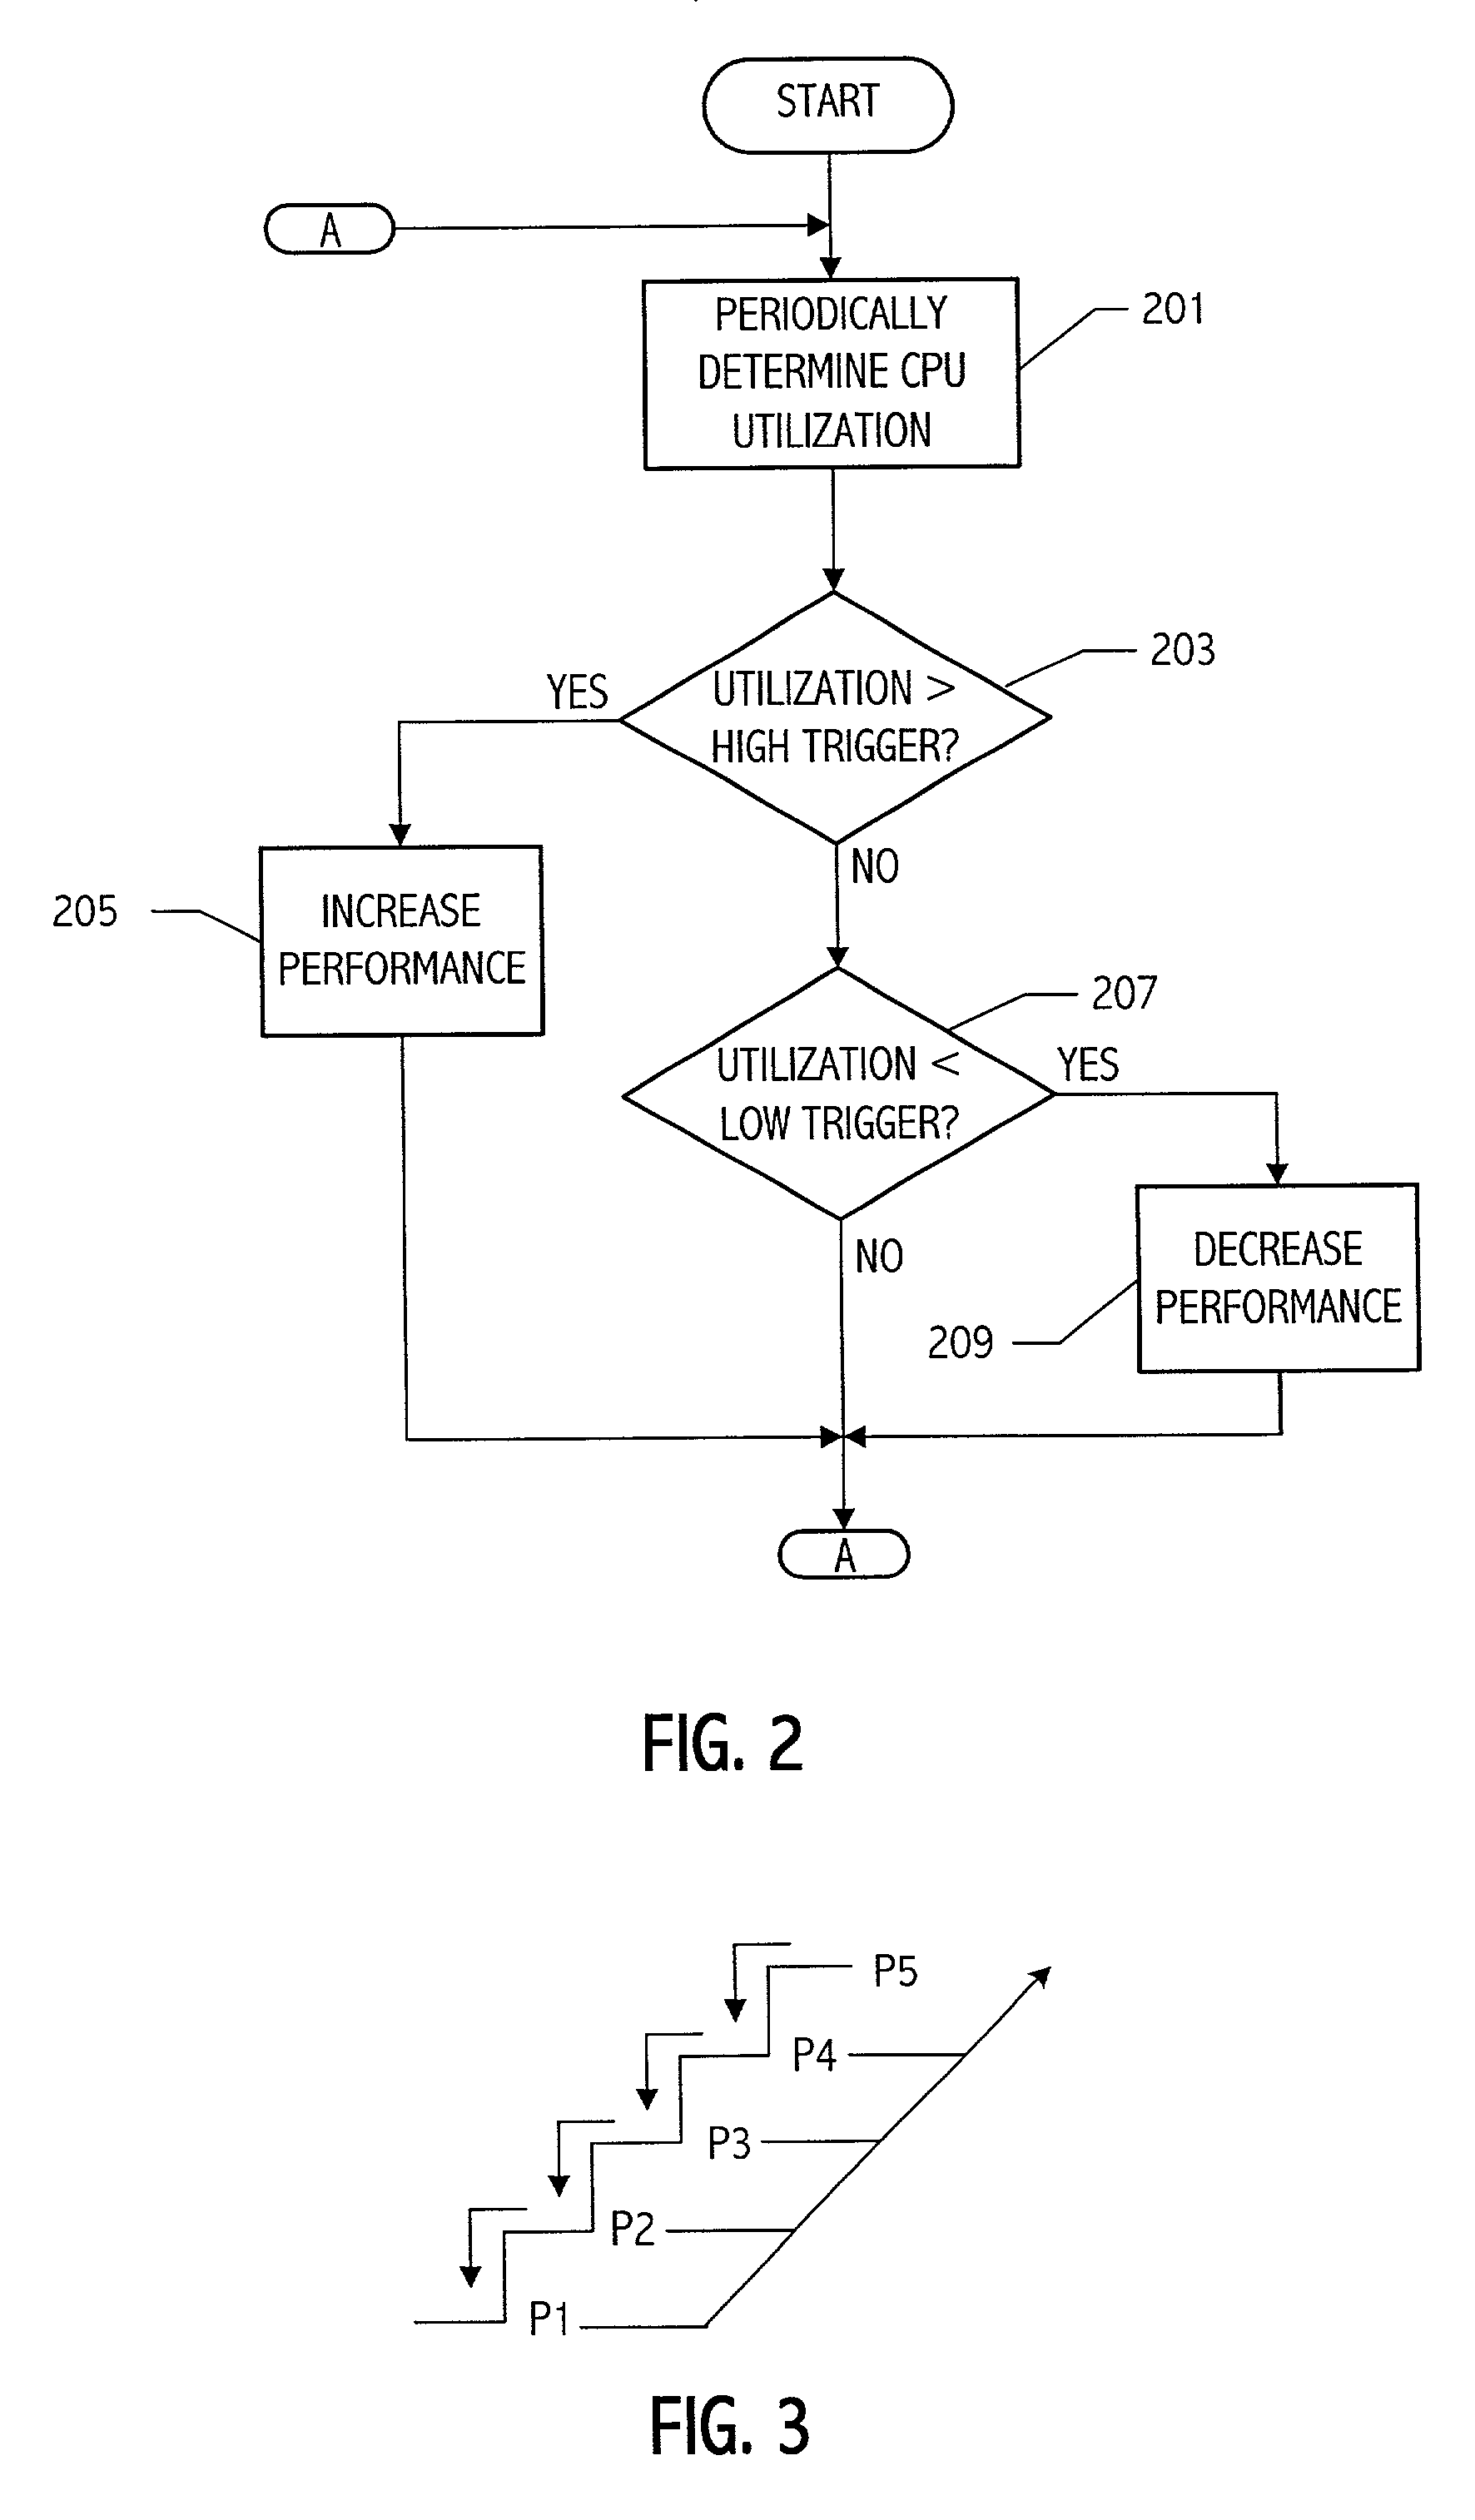 System and method for controlling an intergrated circuit to enter a predetermined performance state by skipping all intermediate states based on the determined utilization of the intergrated circuit